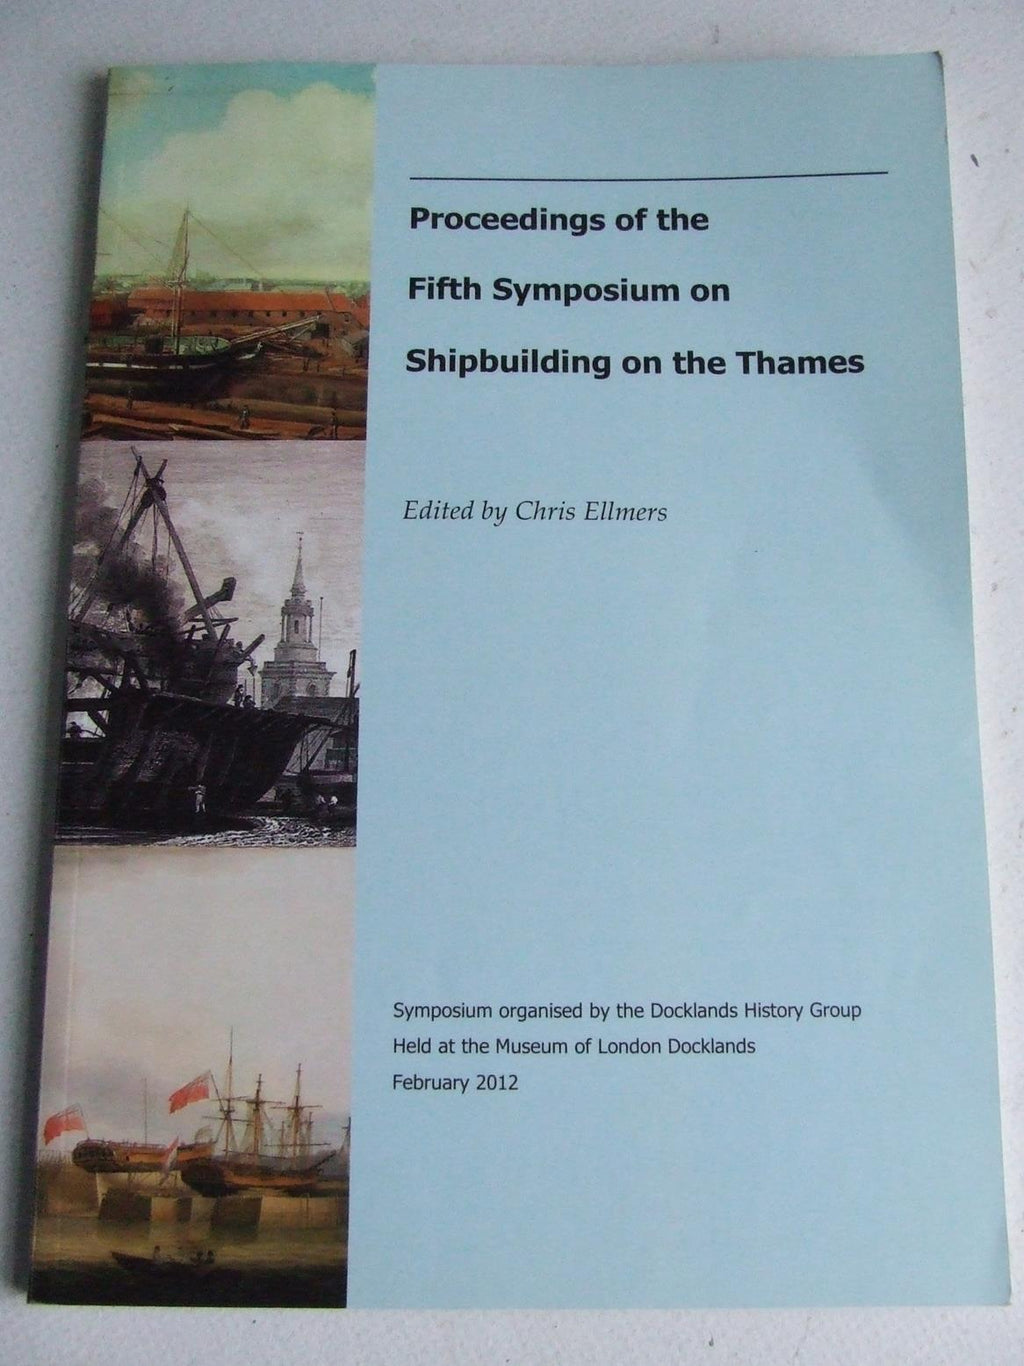 Proceedings of the Fifth Symposium on Shipbuilding on the Thames